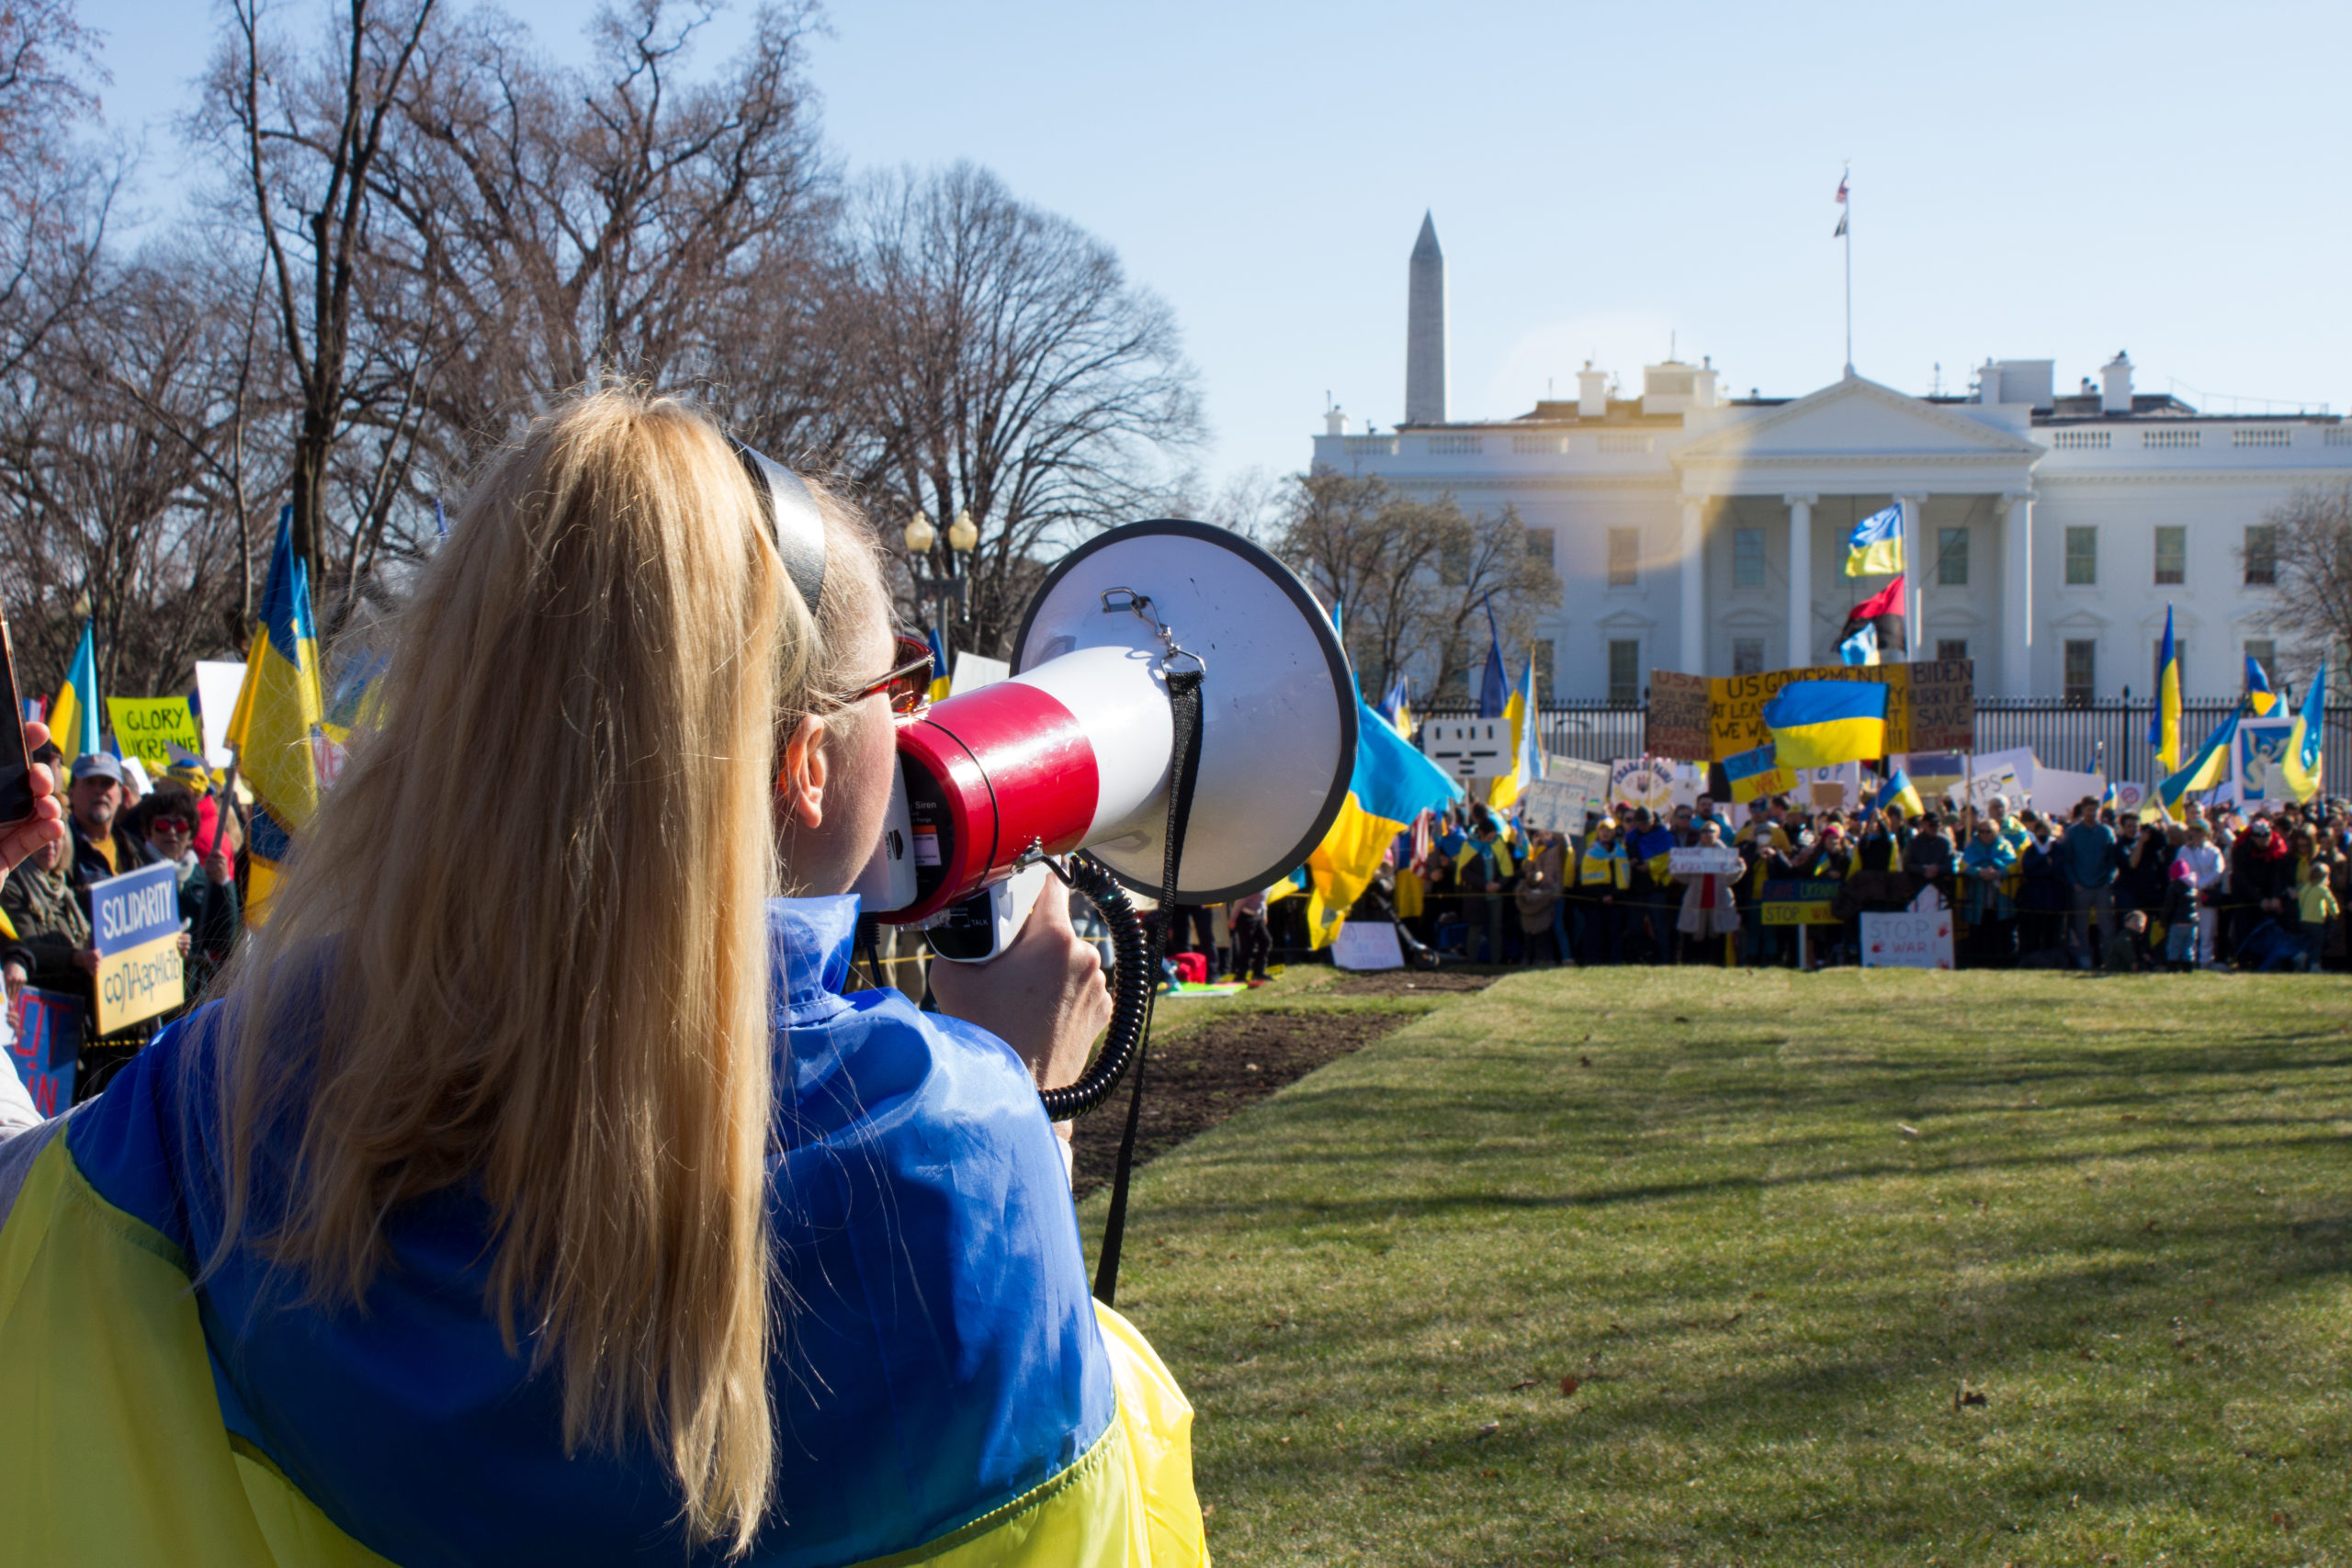 A woman with a megaphone and a Ukrainian flag speaks in front of a crowd outside the White House